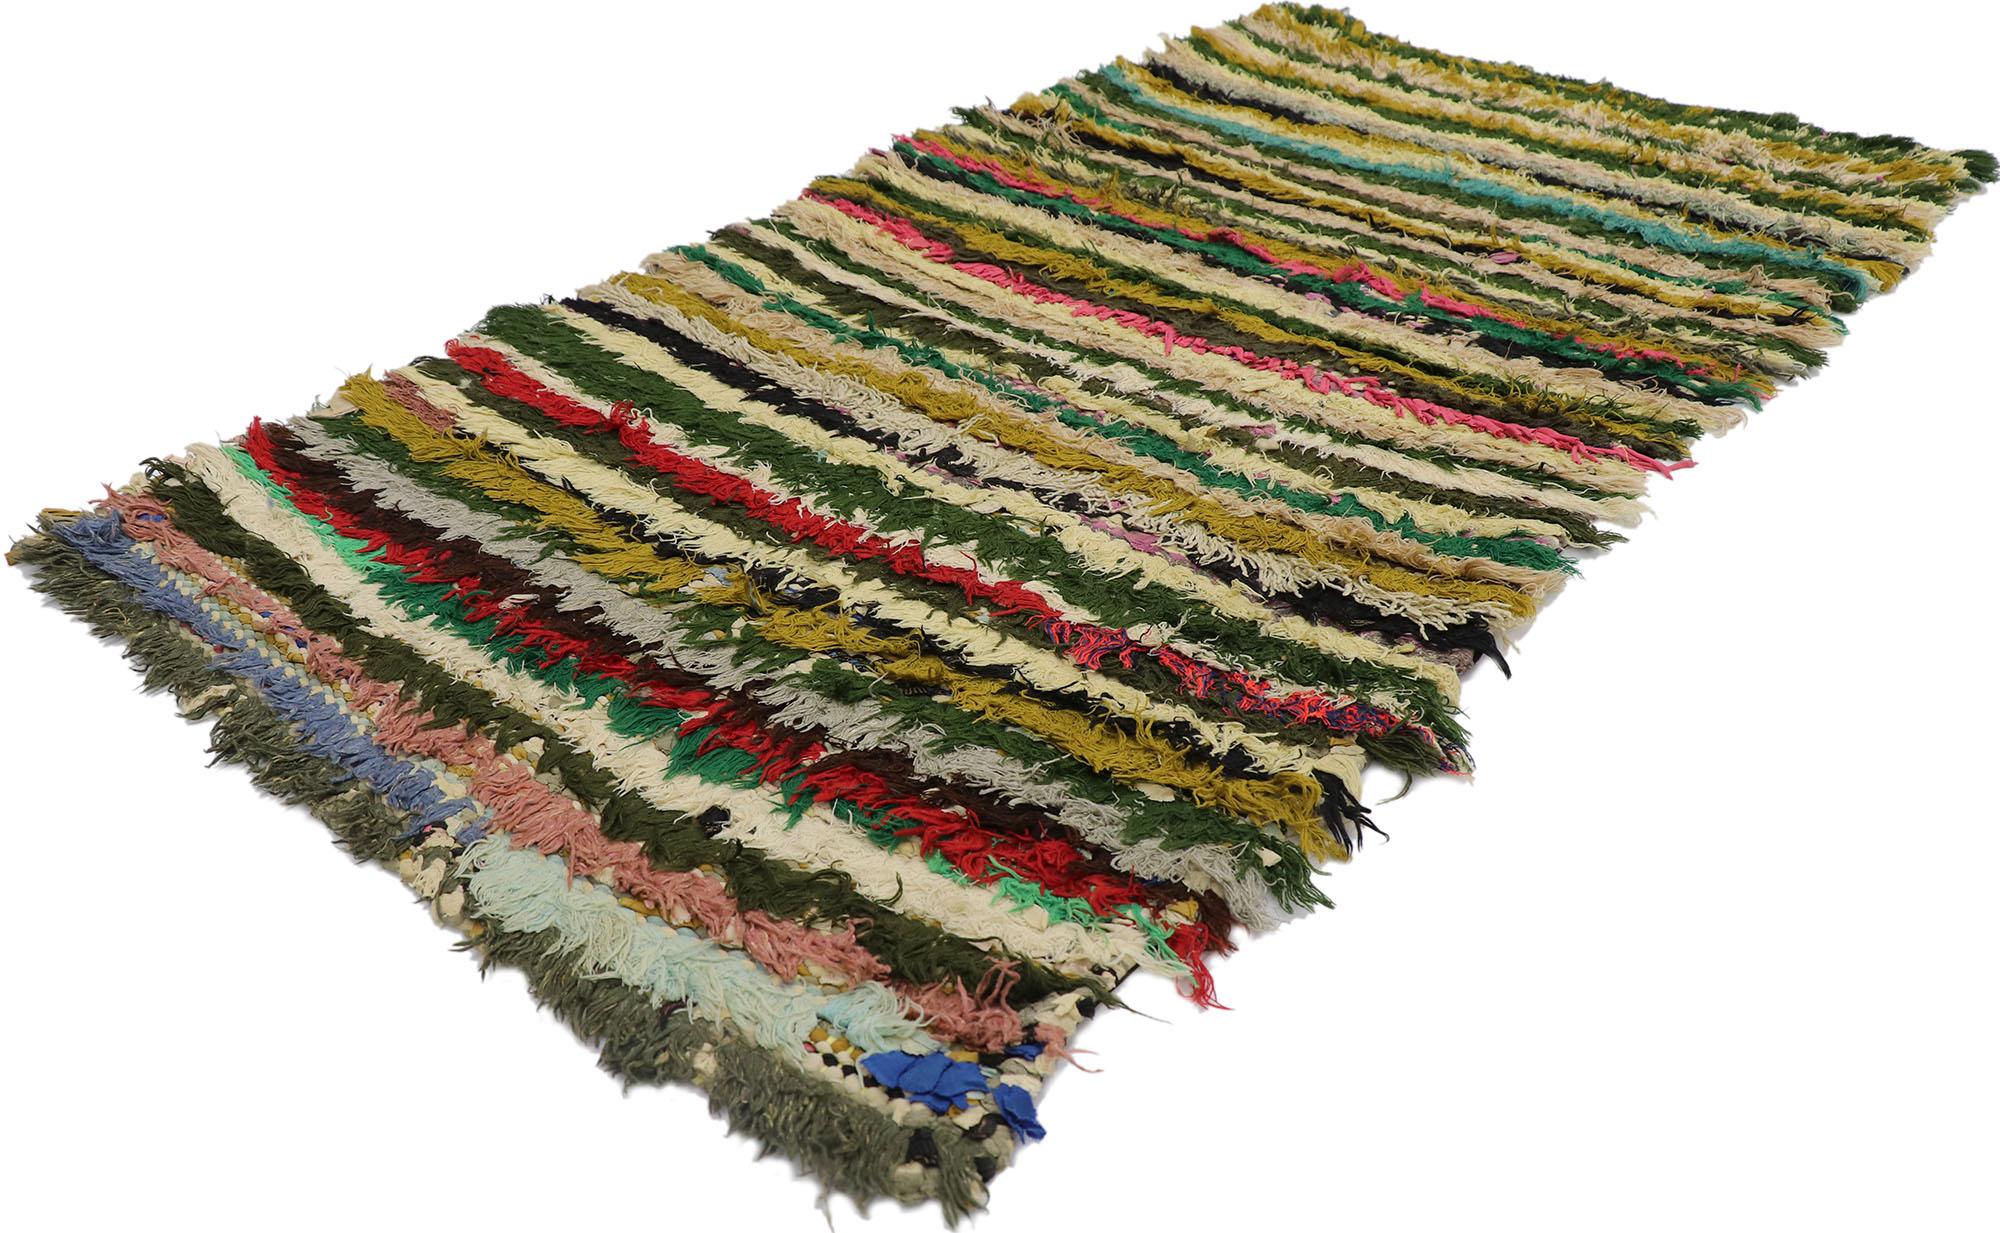 21563 Vintage Boucherouite Moroccan Rug, 02'06 x 05'00.
Nomadic charm meets stylish stripes in this hand knotted vintage Berber Boucherouite Moroccan rag rug. The intrinsic linear design and nature-inspired color palette woven into this piece work